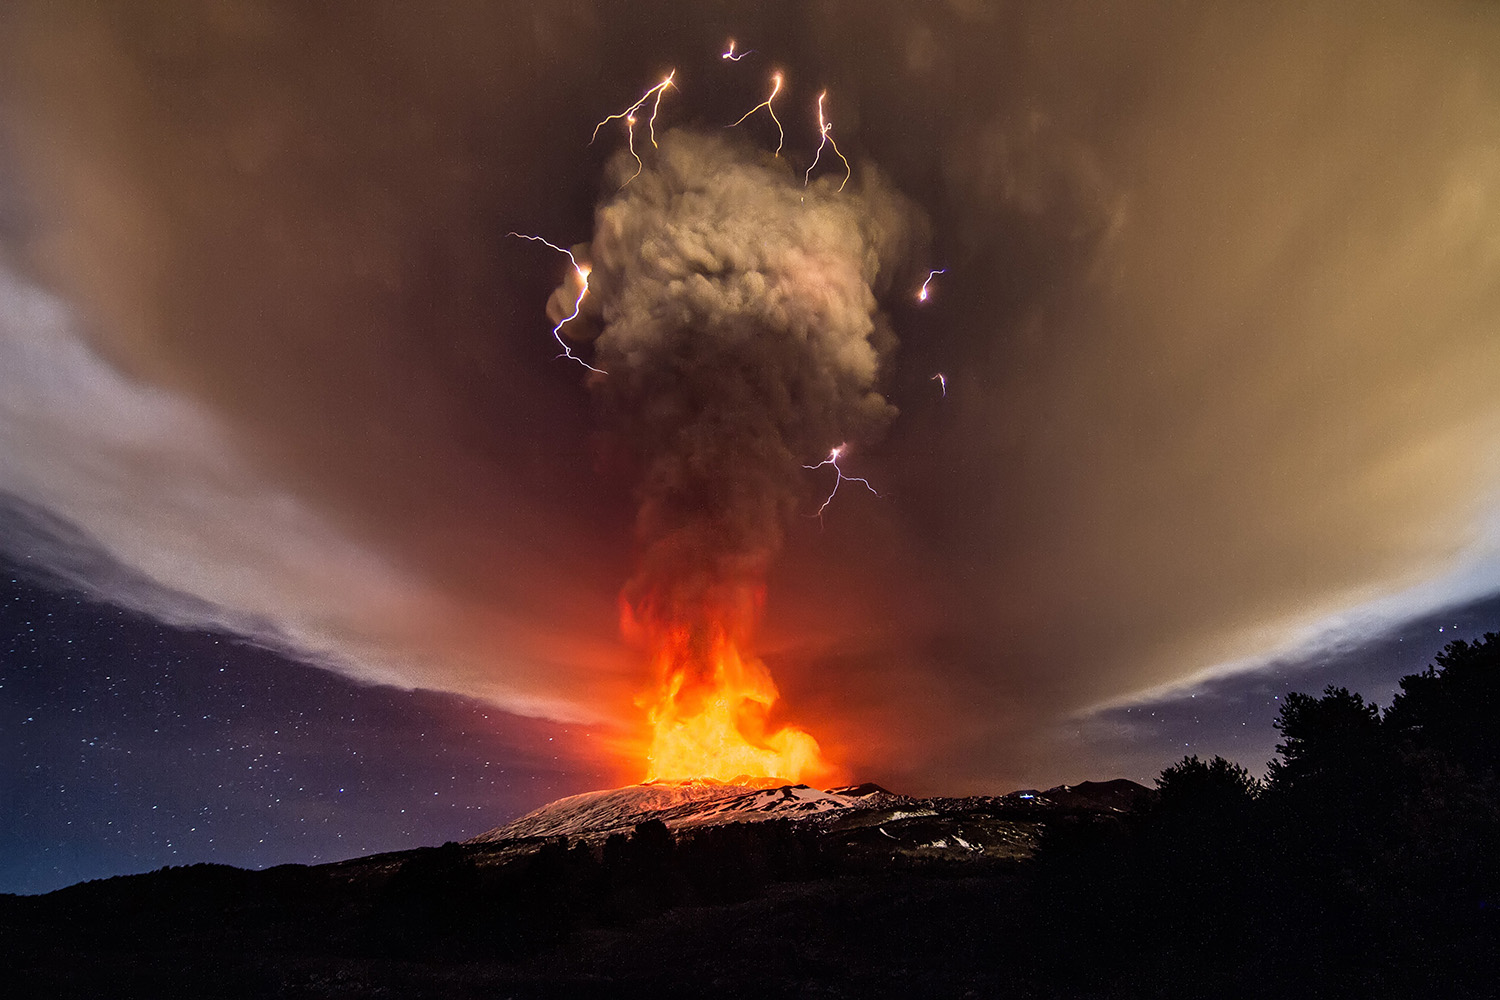 Explosions from Mount Etna's Voragine crater light up night sky